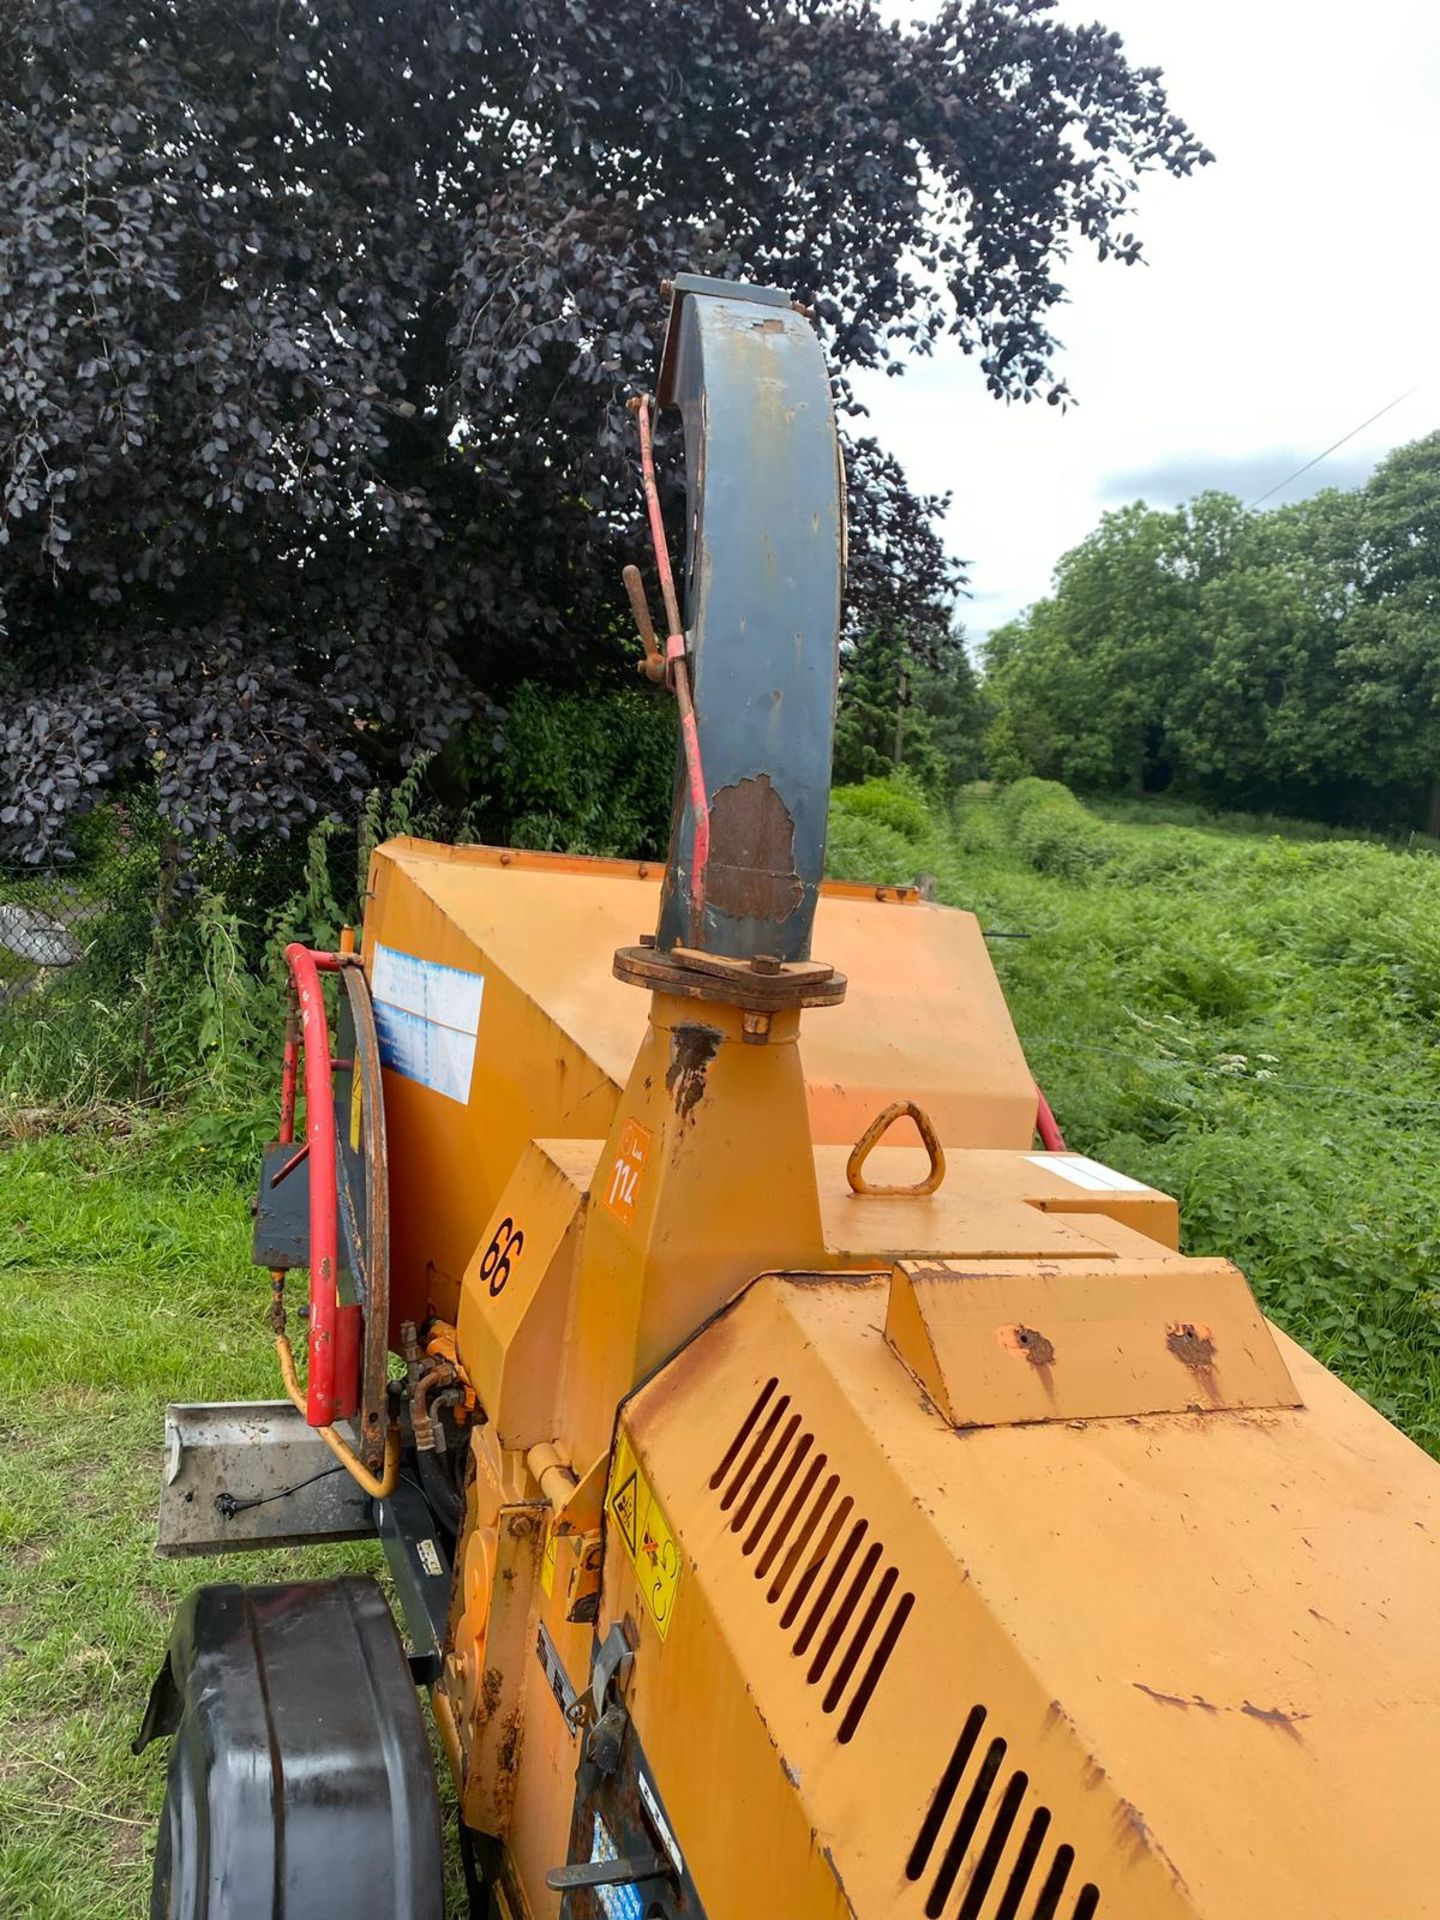 JENSEN A540 FAST TOW WOOD CHIPPER, KUBOTA DIESEL ENGINE, RUNS WORKS AND CIPPS *PLUS VAT* - Image 4 of 6